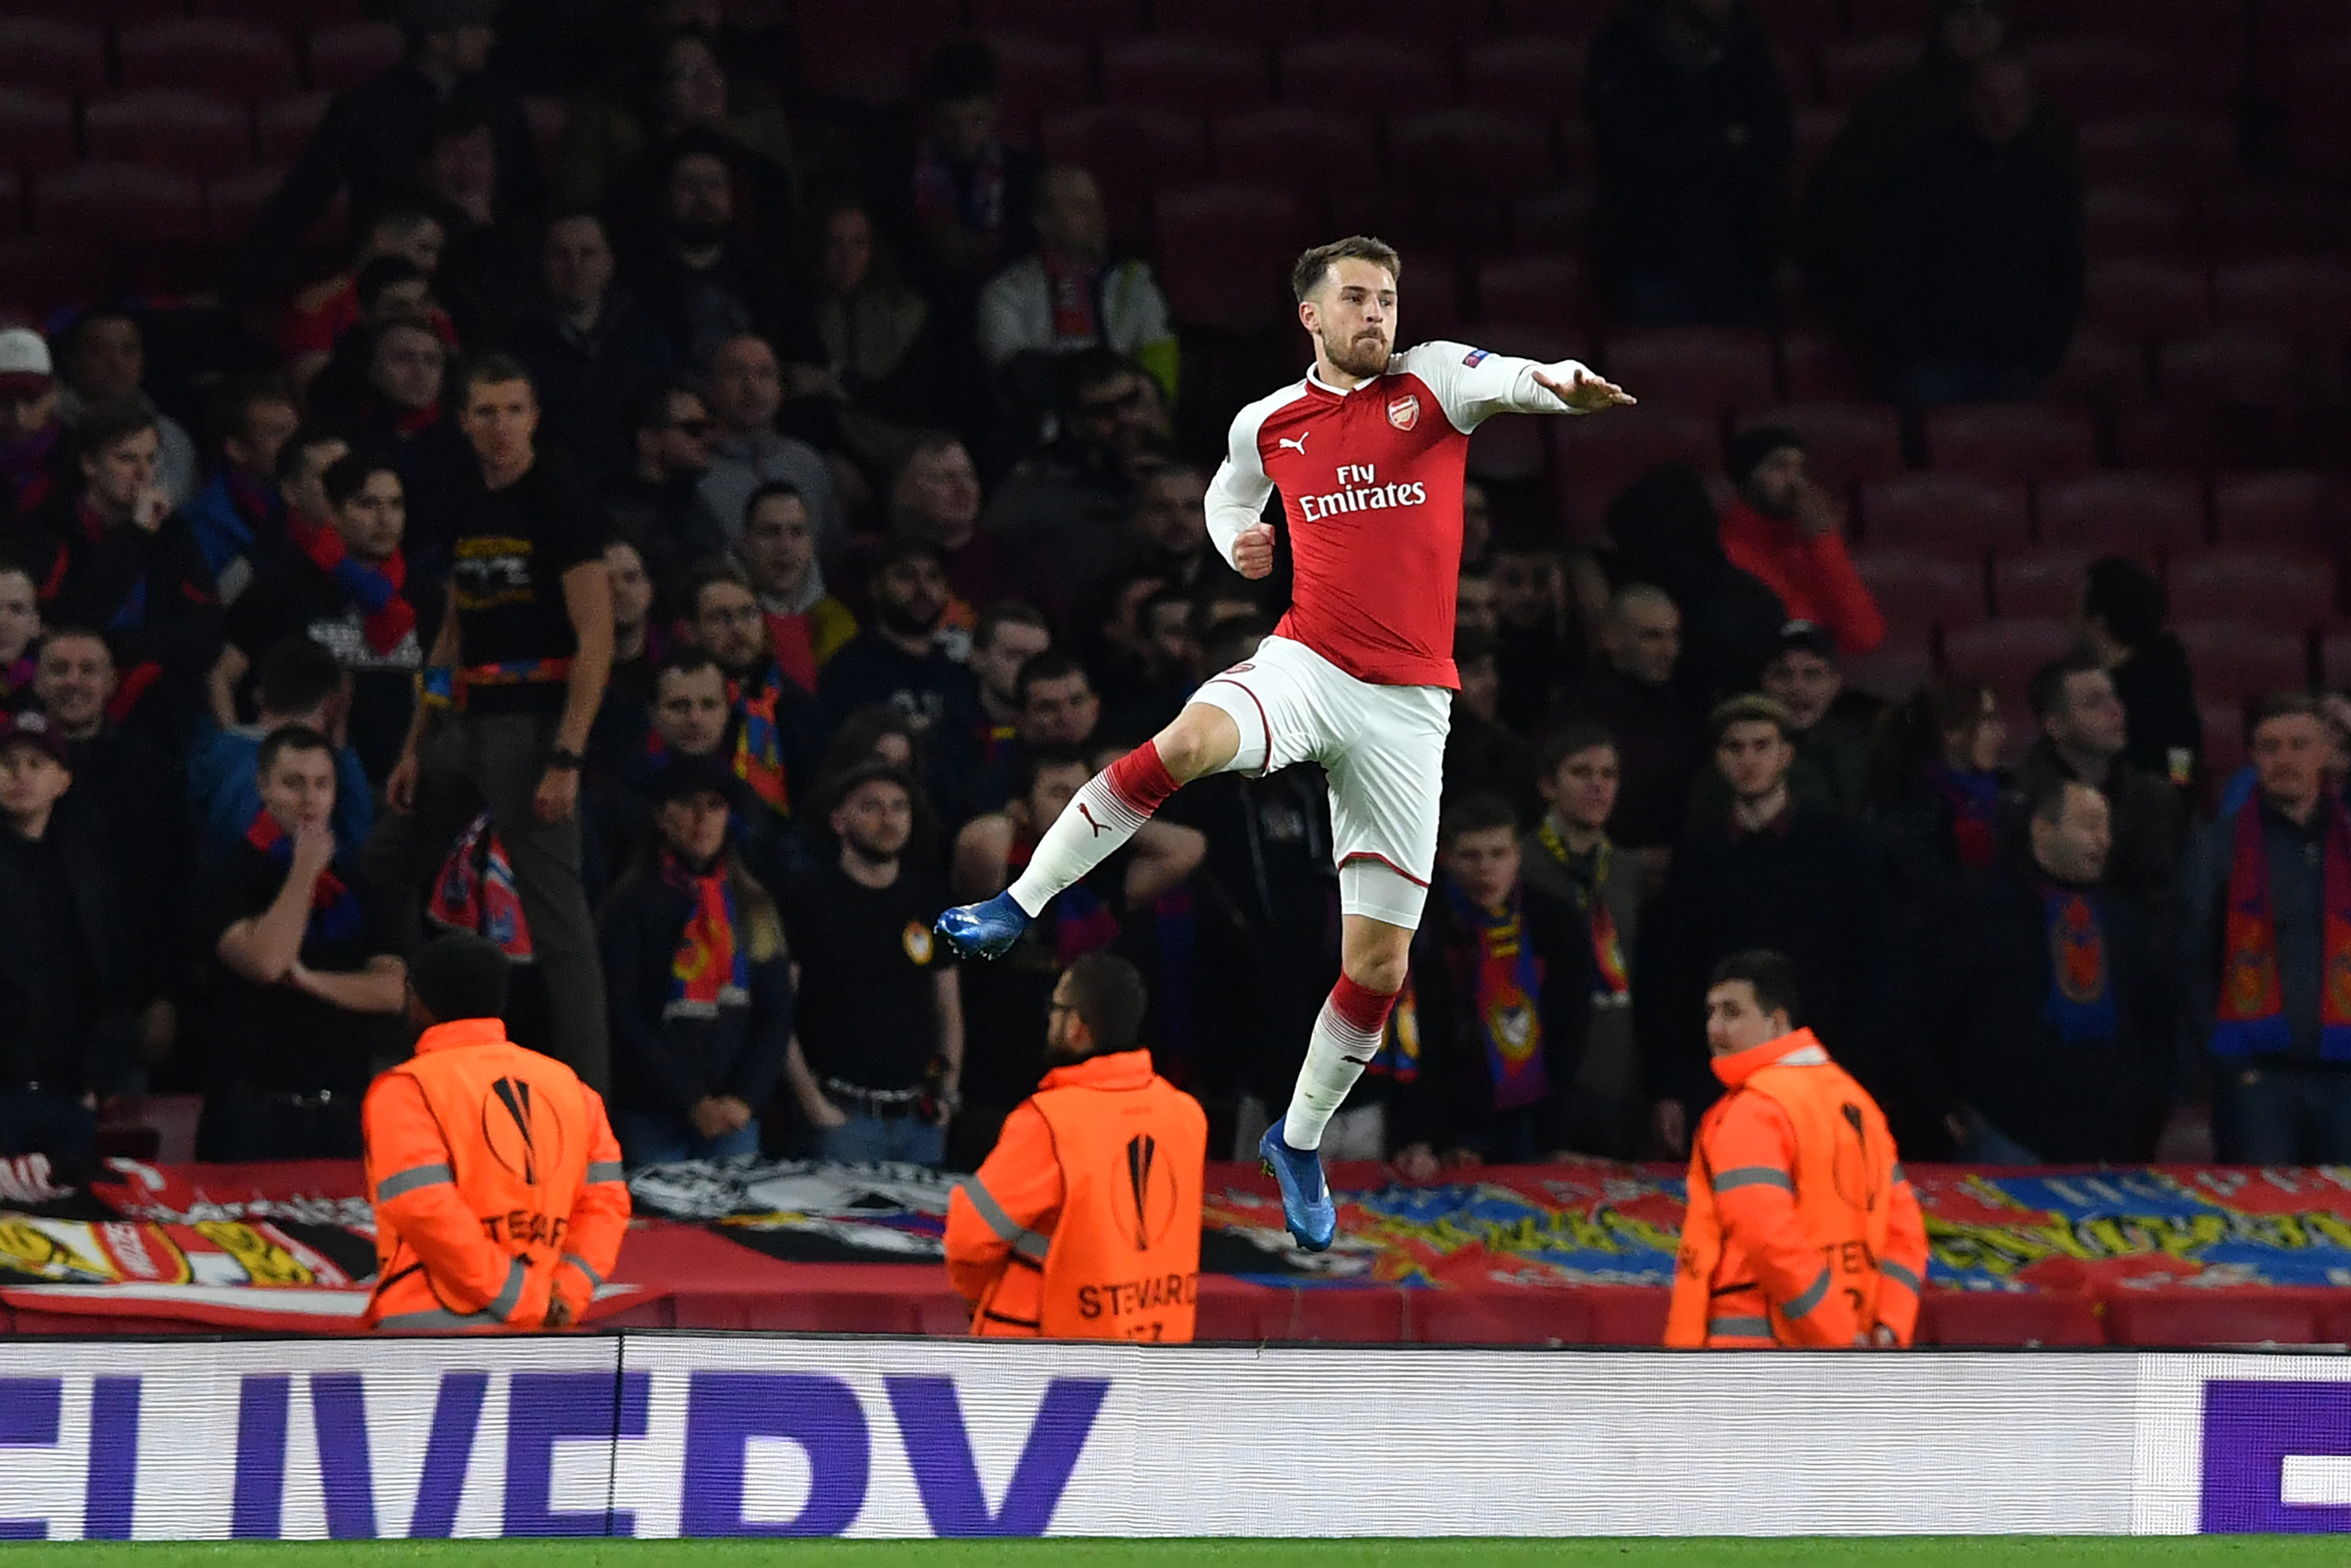 Arsenal's Welsh midfielder Aaron Ramsey celebrates after scoring their third goal during the UEFA Europa League first leg quarter-final football match between Arsenal and CSKA Moscow at the Emirates Stadium in London on April 5, 2018.  / AFP PHOTO / Ben STANSALL        (Photo credit should read BEN STANSALL/AFP/Getty Images)